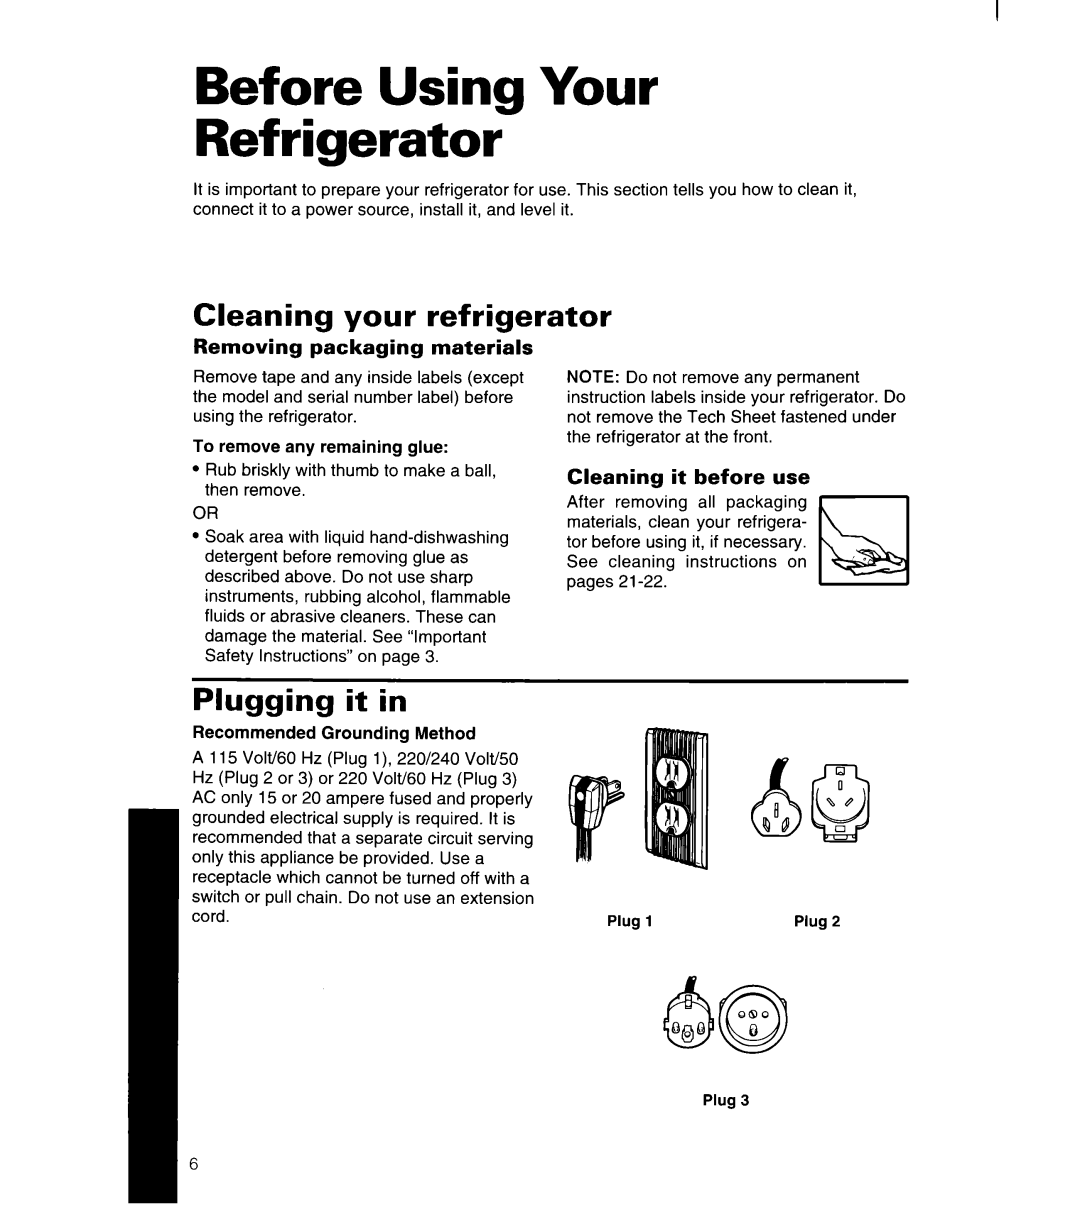 Whirlpool 4YED27DQDN00 Before Using Your Refrigerator, Cleaning your refrigerator, Plugging, Removing packaging materials 